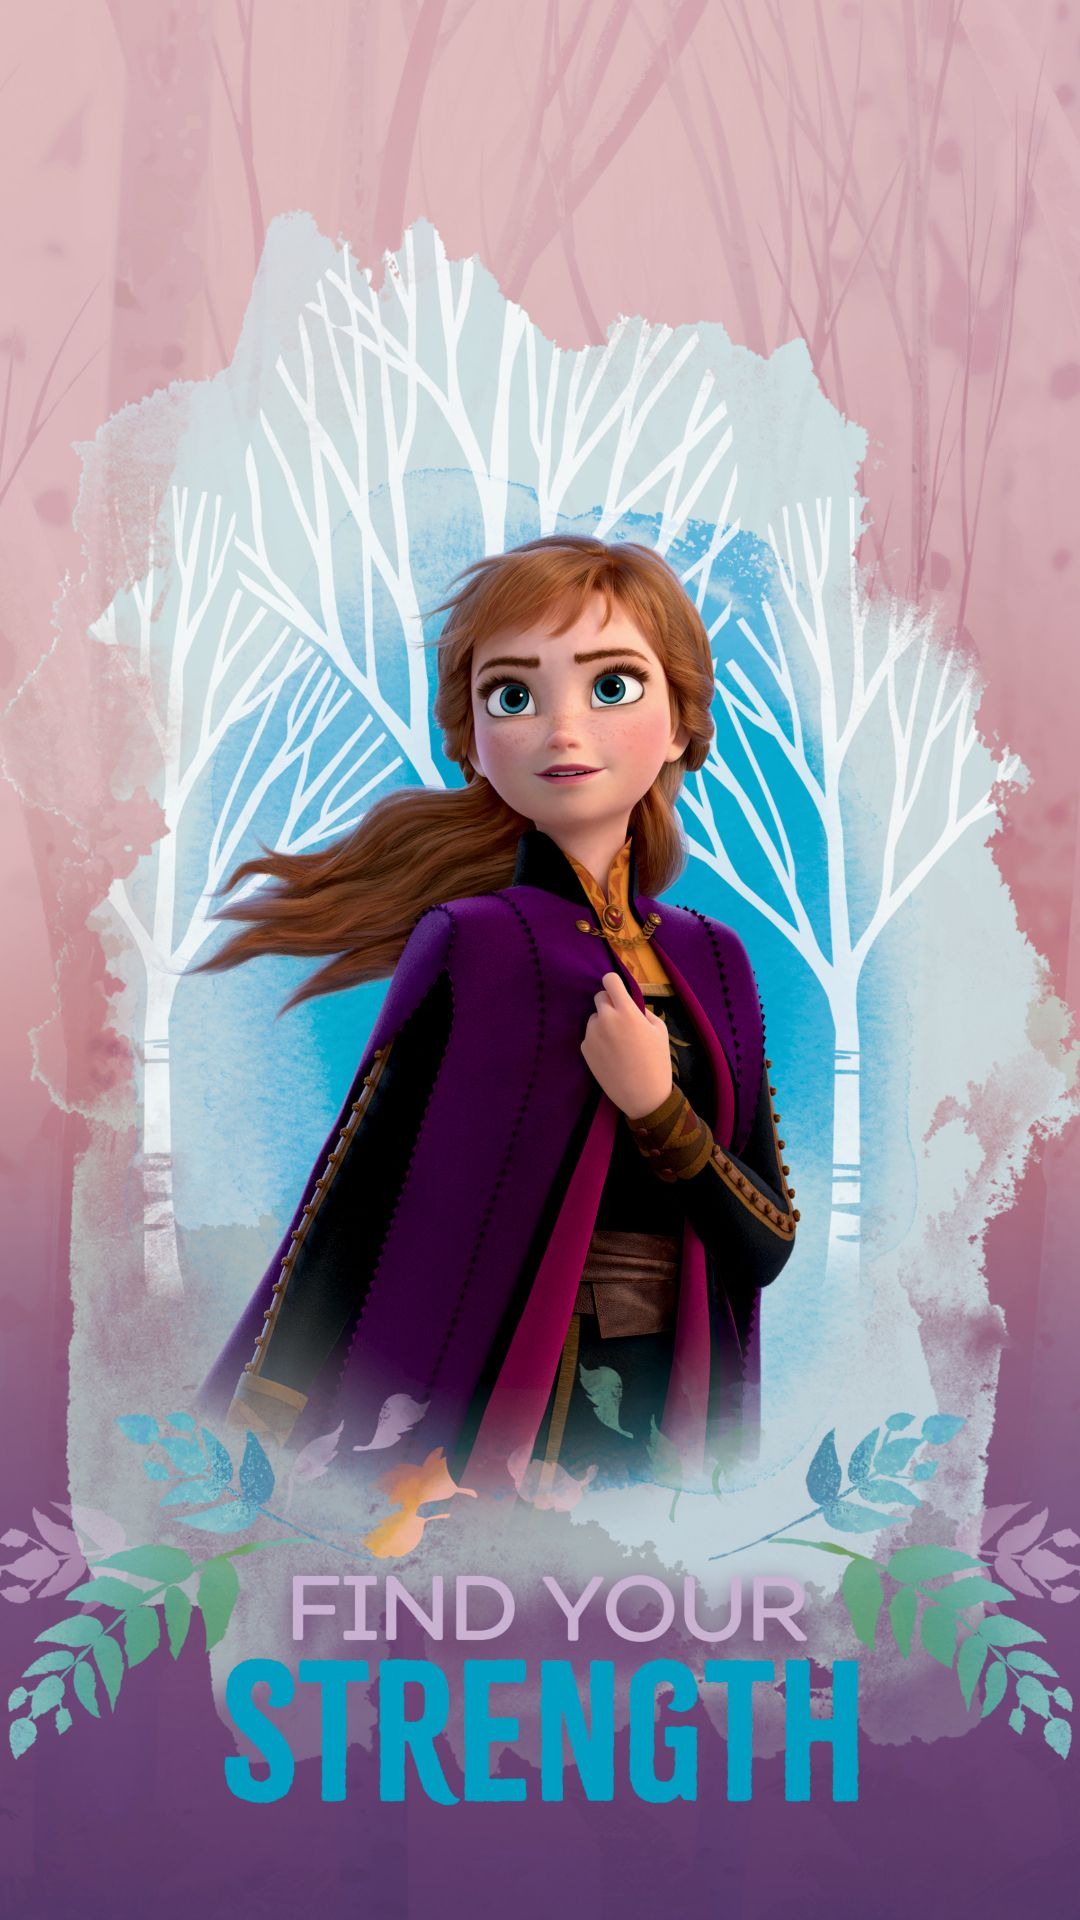 Frozen 2 Phone Wallpaper and Anna Photo